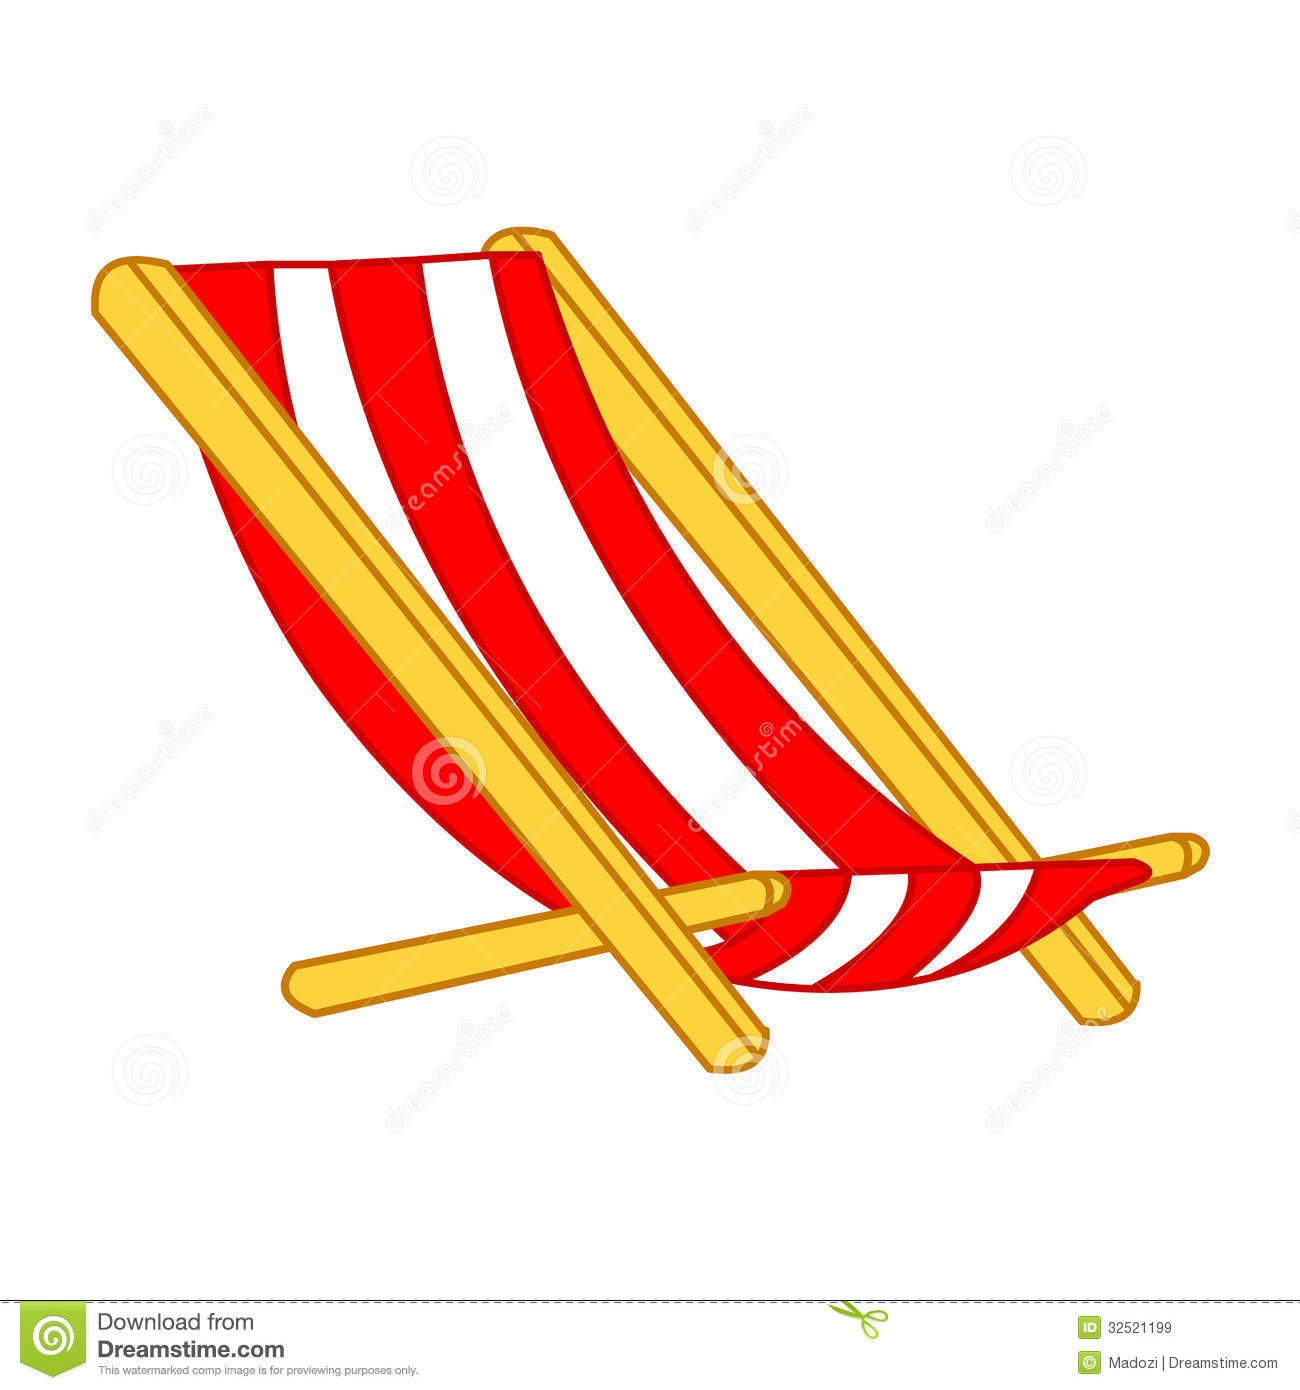 Turquoise Beach Chair with An